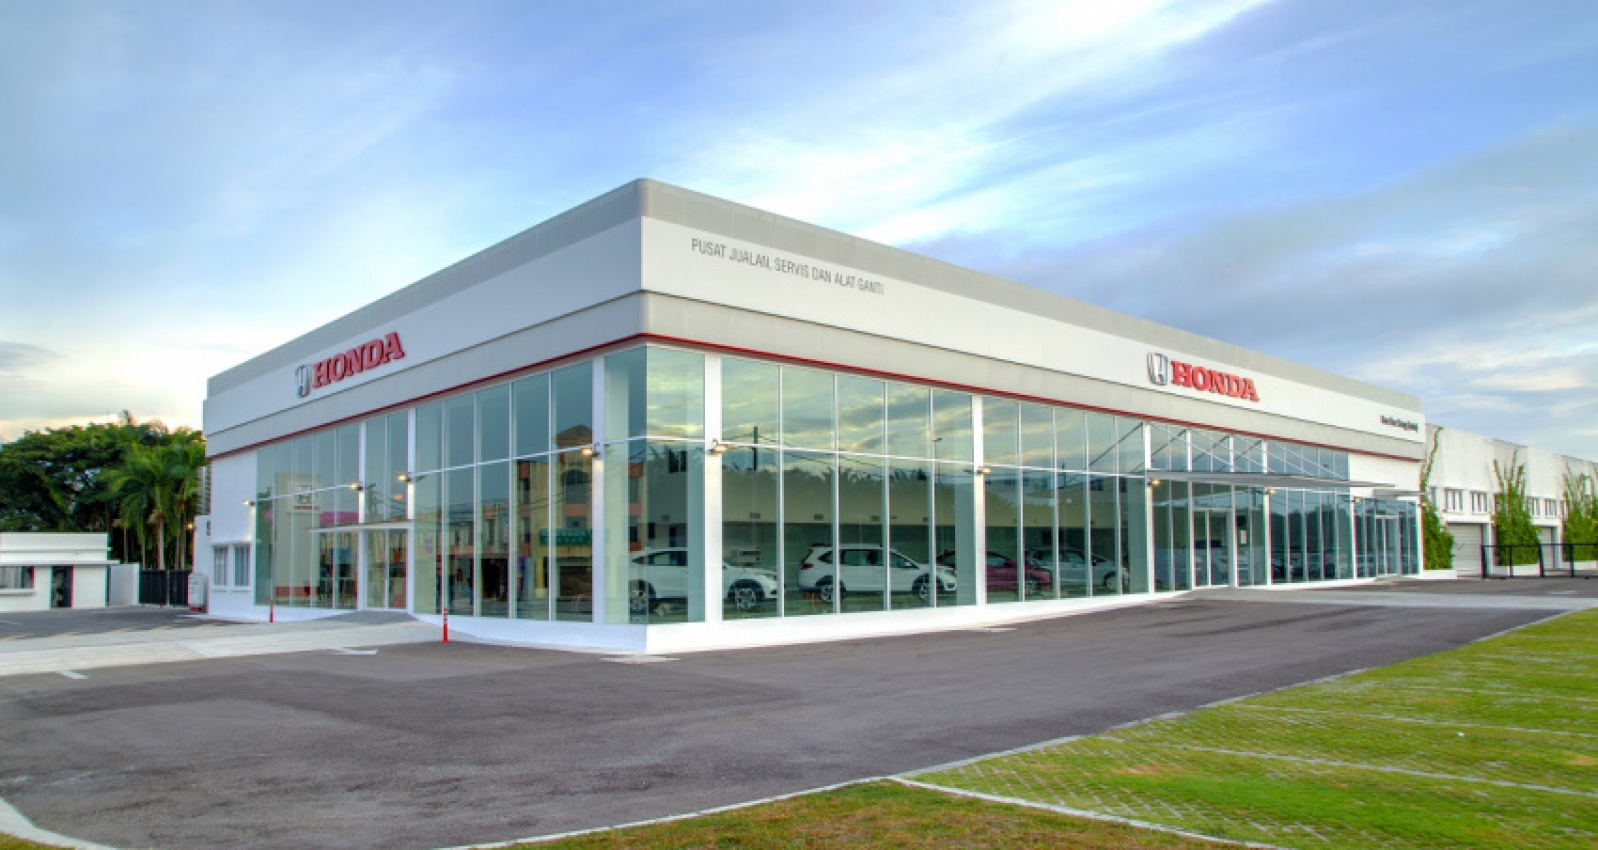 autos, car brands, cars, honda, 3s centre, automotive, ban hoe seng (auto), dealership, green building index, honda malaysia, malaysia, service centre, showroom, honda malaysia opens first green certified 3s dealership in the country